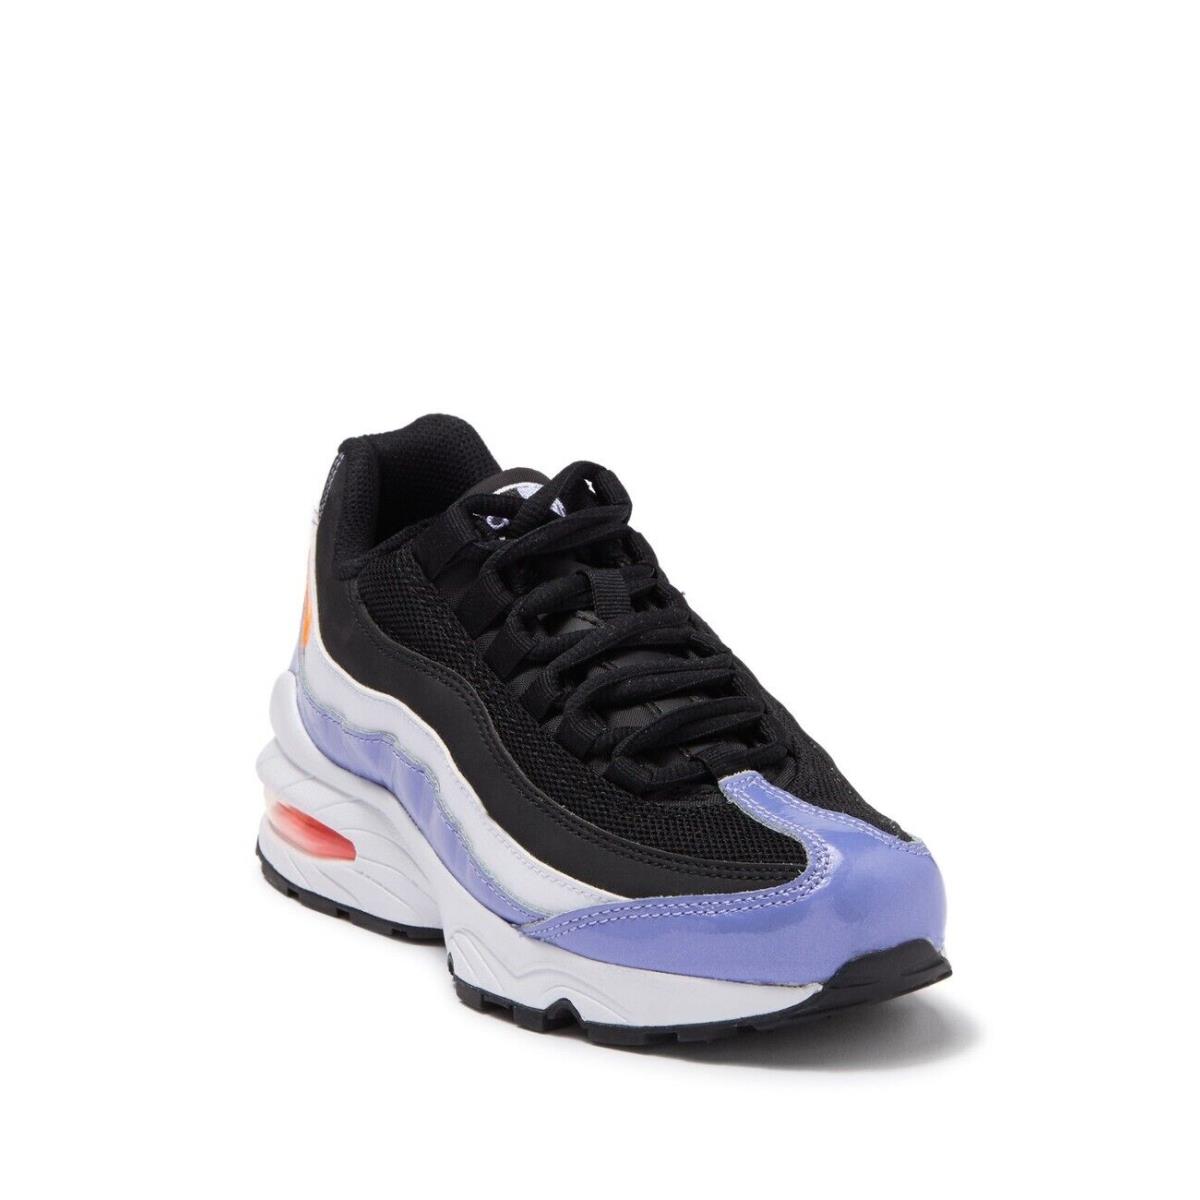 Nike Air Max 95 LE Limited Edition : Youth Size 4.5 TO 7.0 Black Orange - BLACK, TOTAL ORANGE